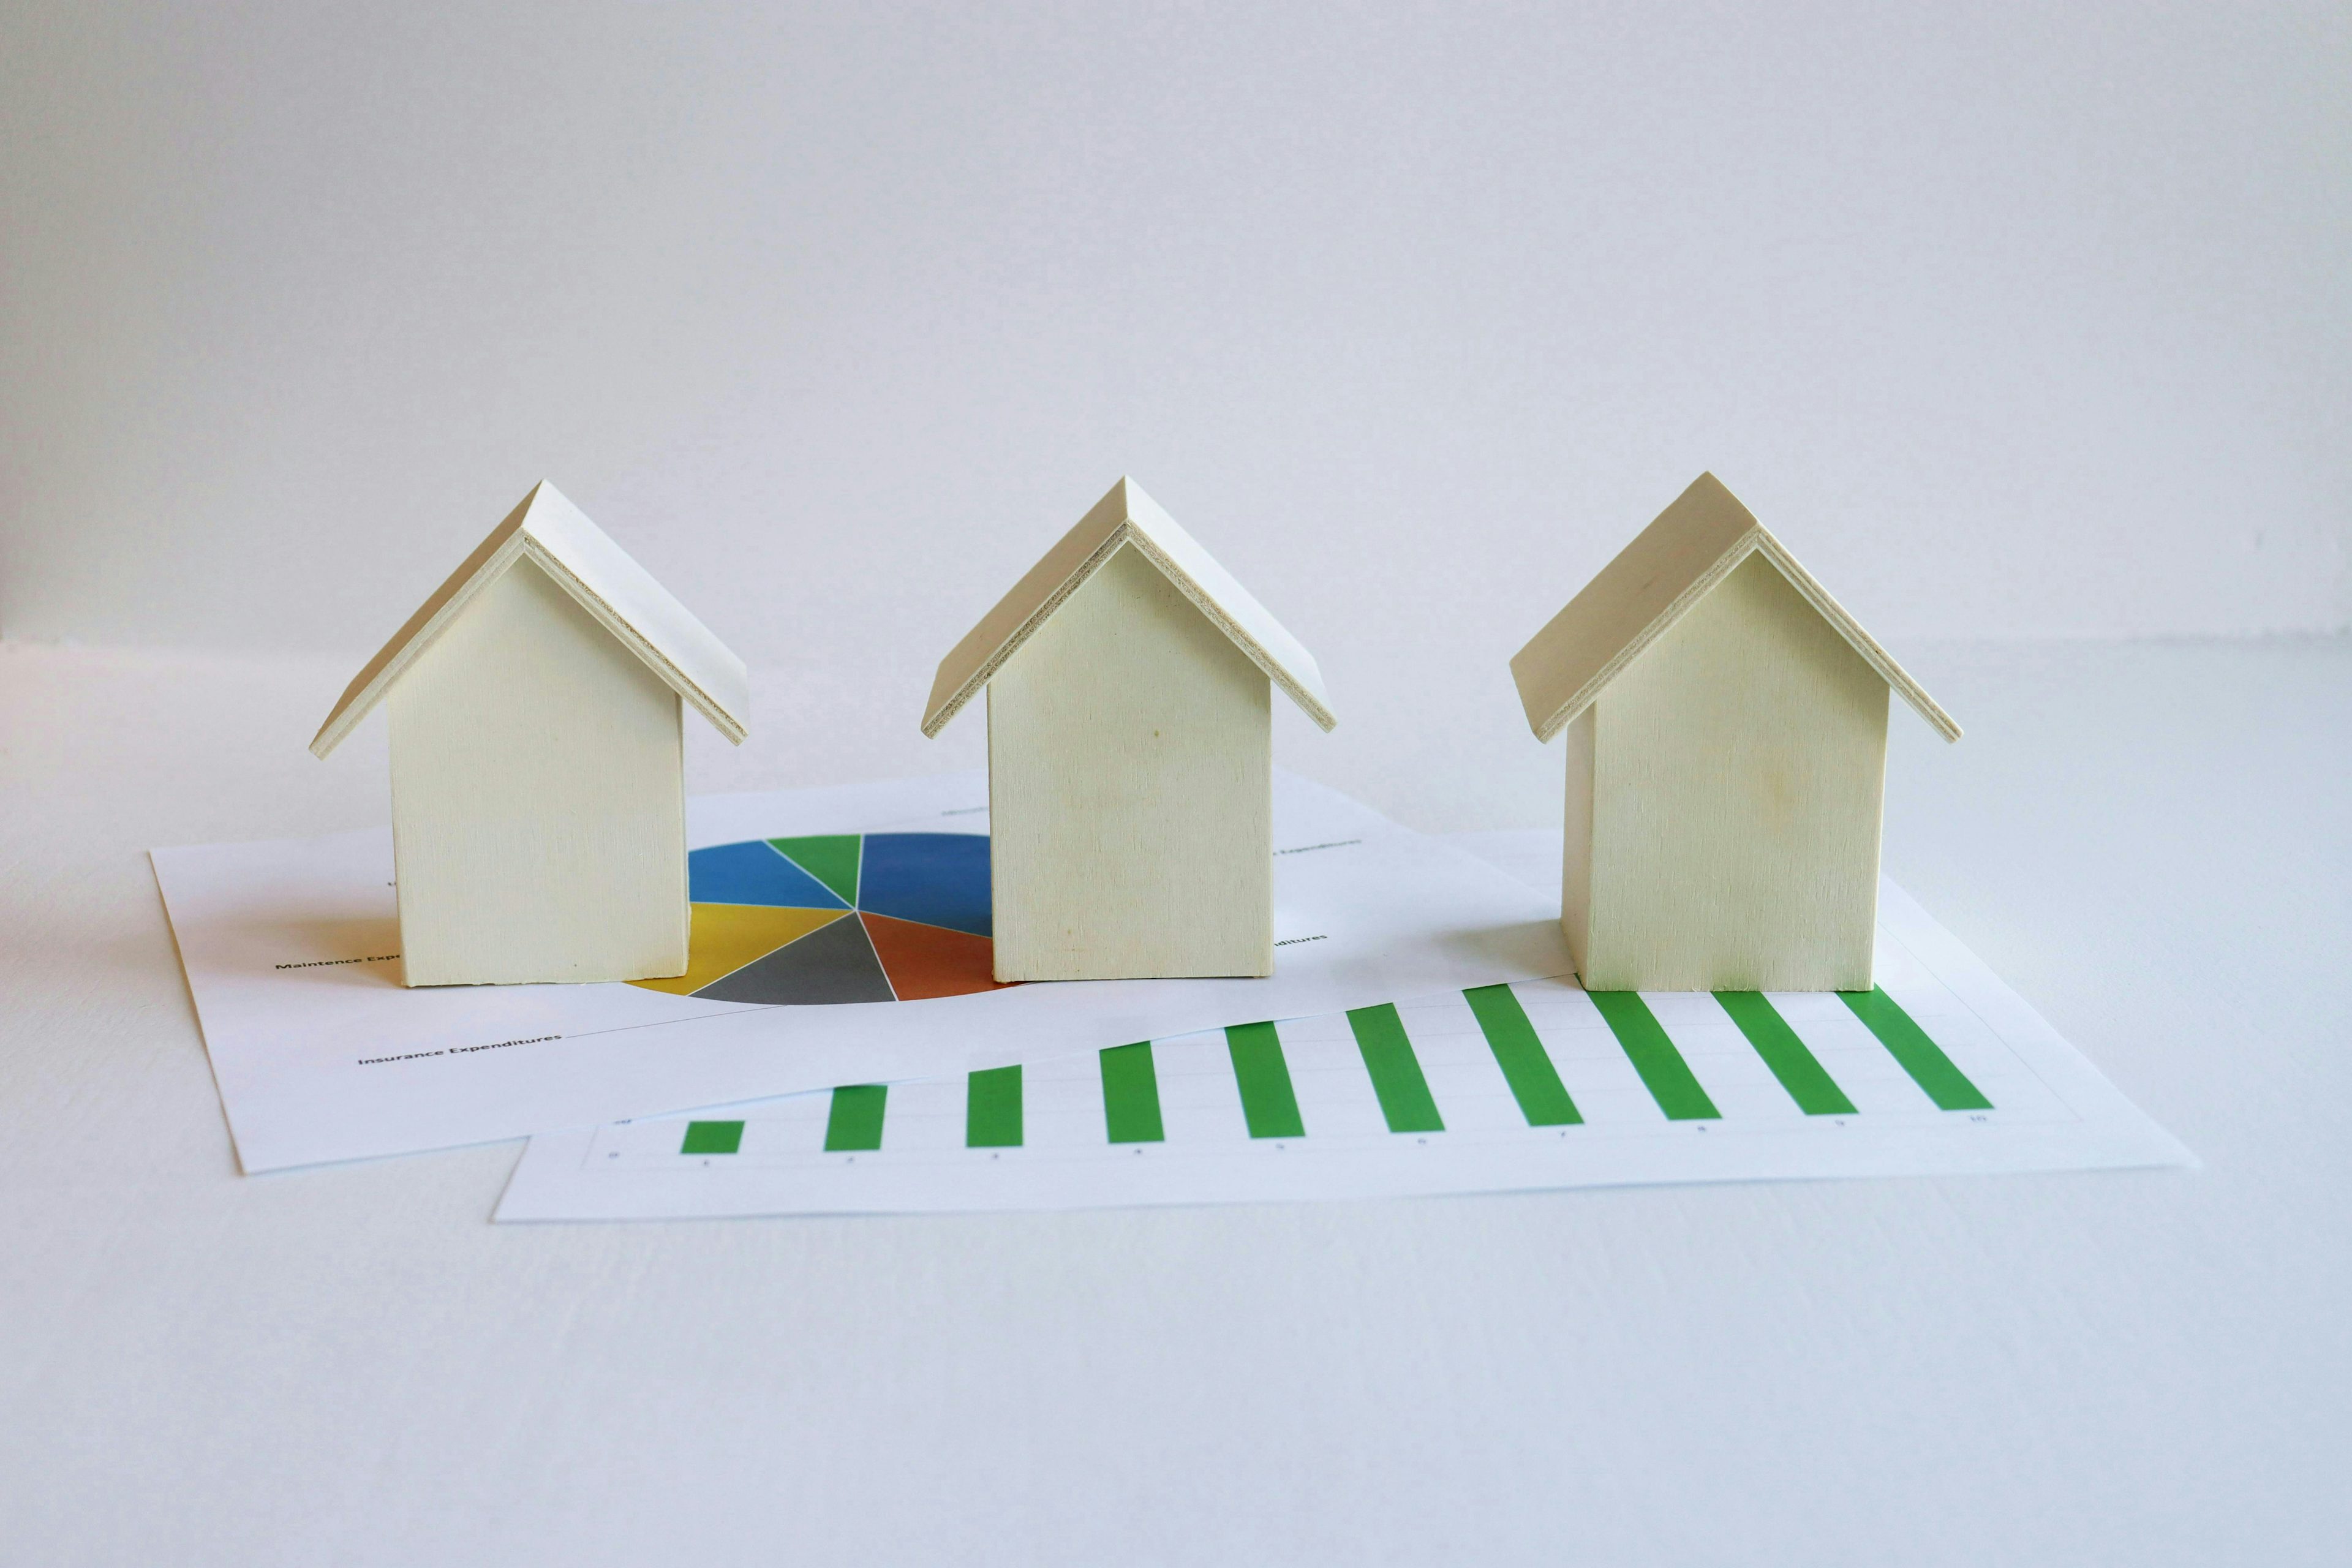 Three plywood model houses placed on top of two sheets of paper, one displaying a pie chart and the other showing a bar graph.